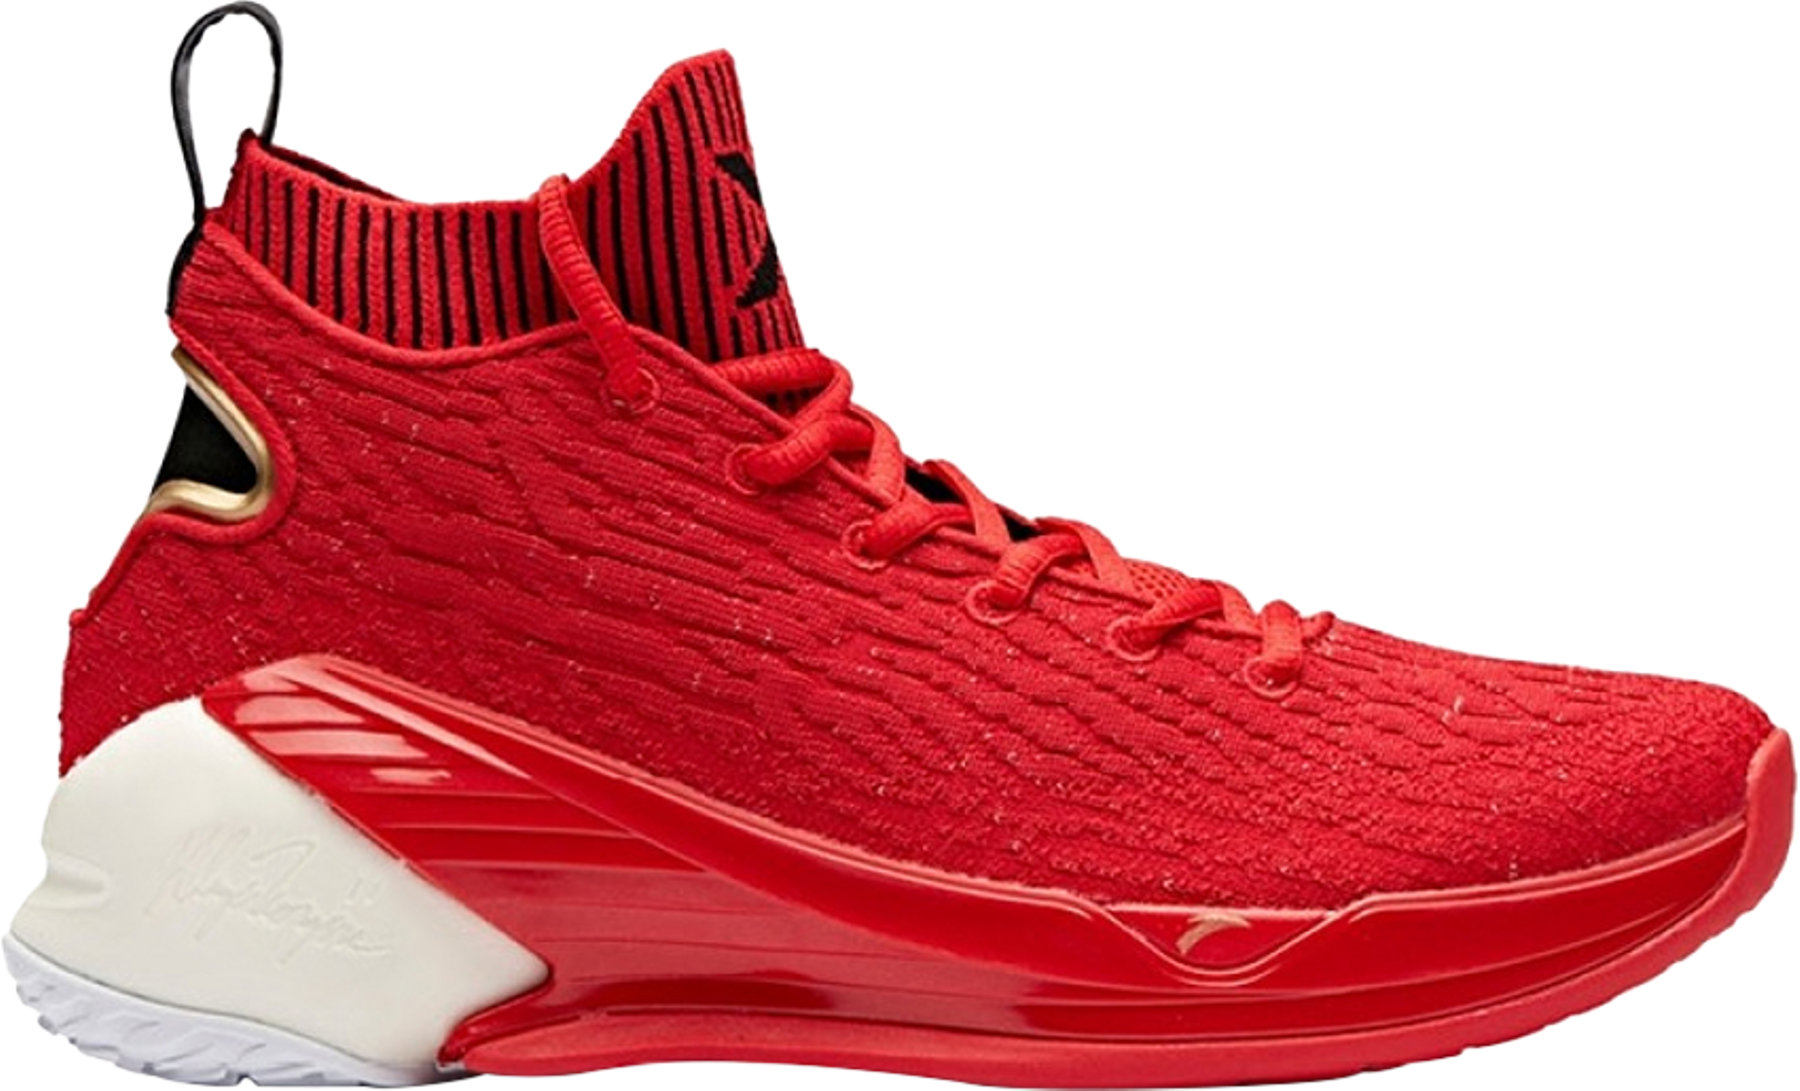 Buy Klay Thompson KT4 'College Red' 2019 - 11911101 2 - Red | GOAT NL